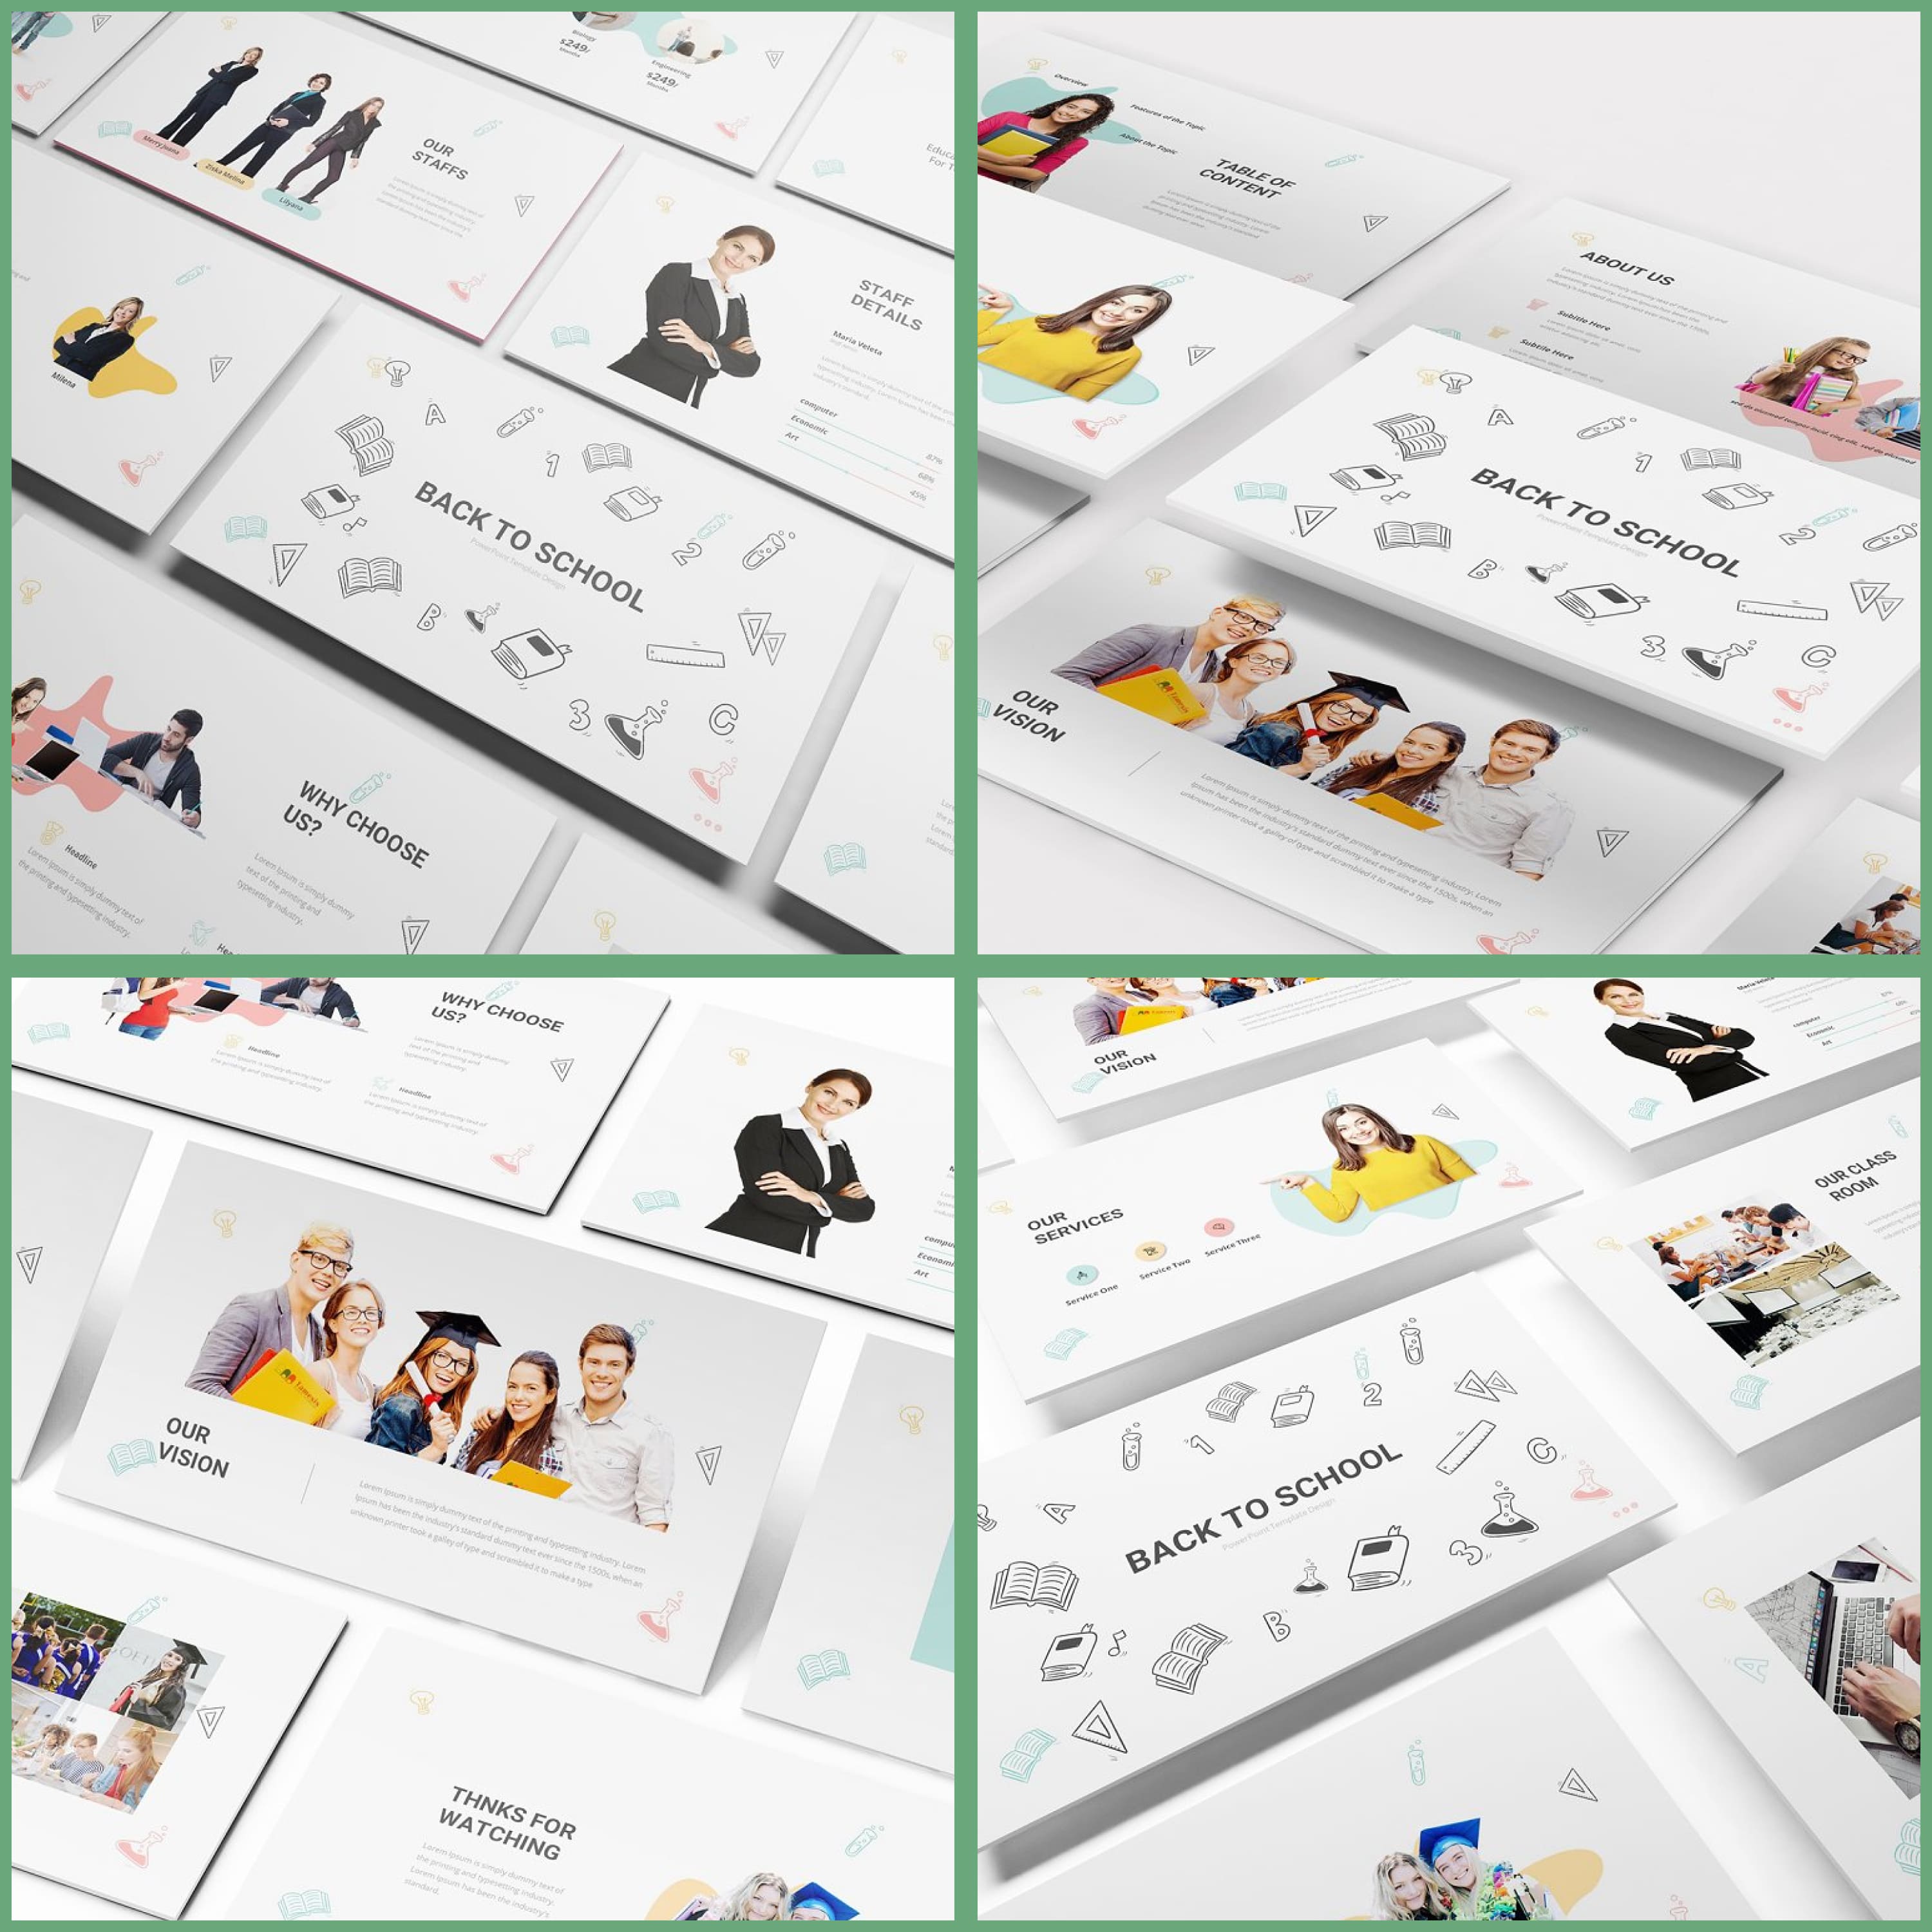 Back To School Powerpoint Template cover.